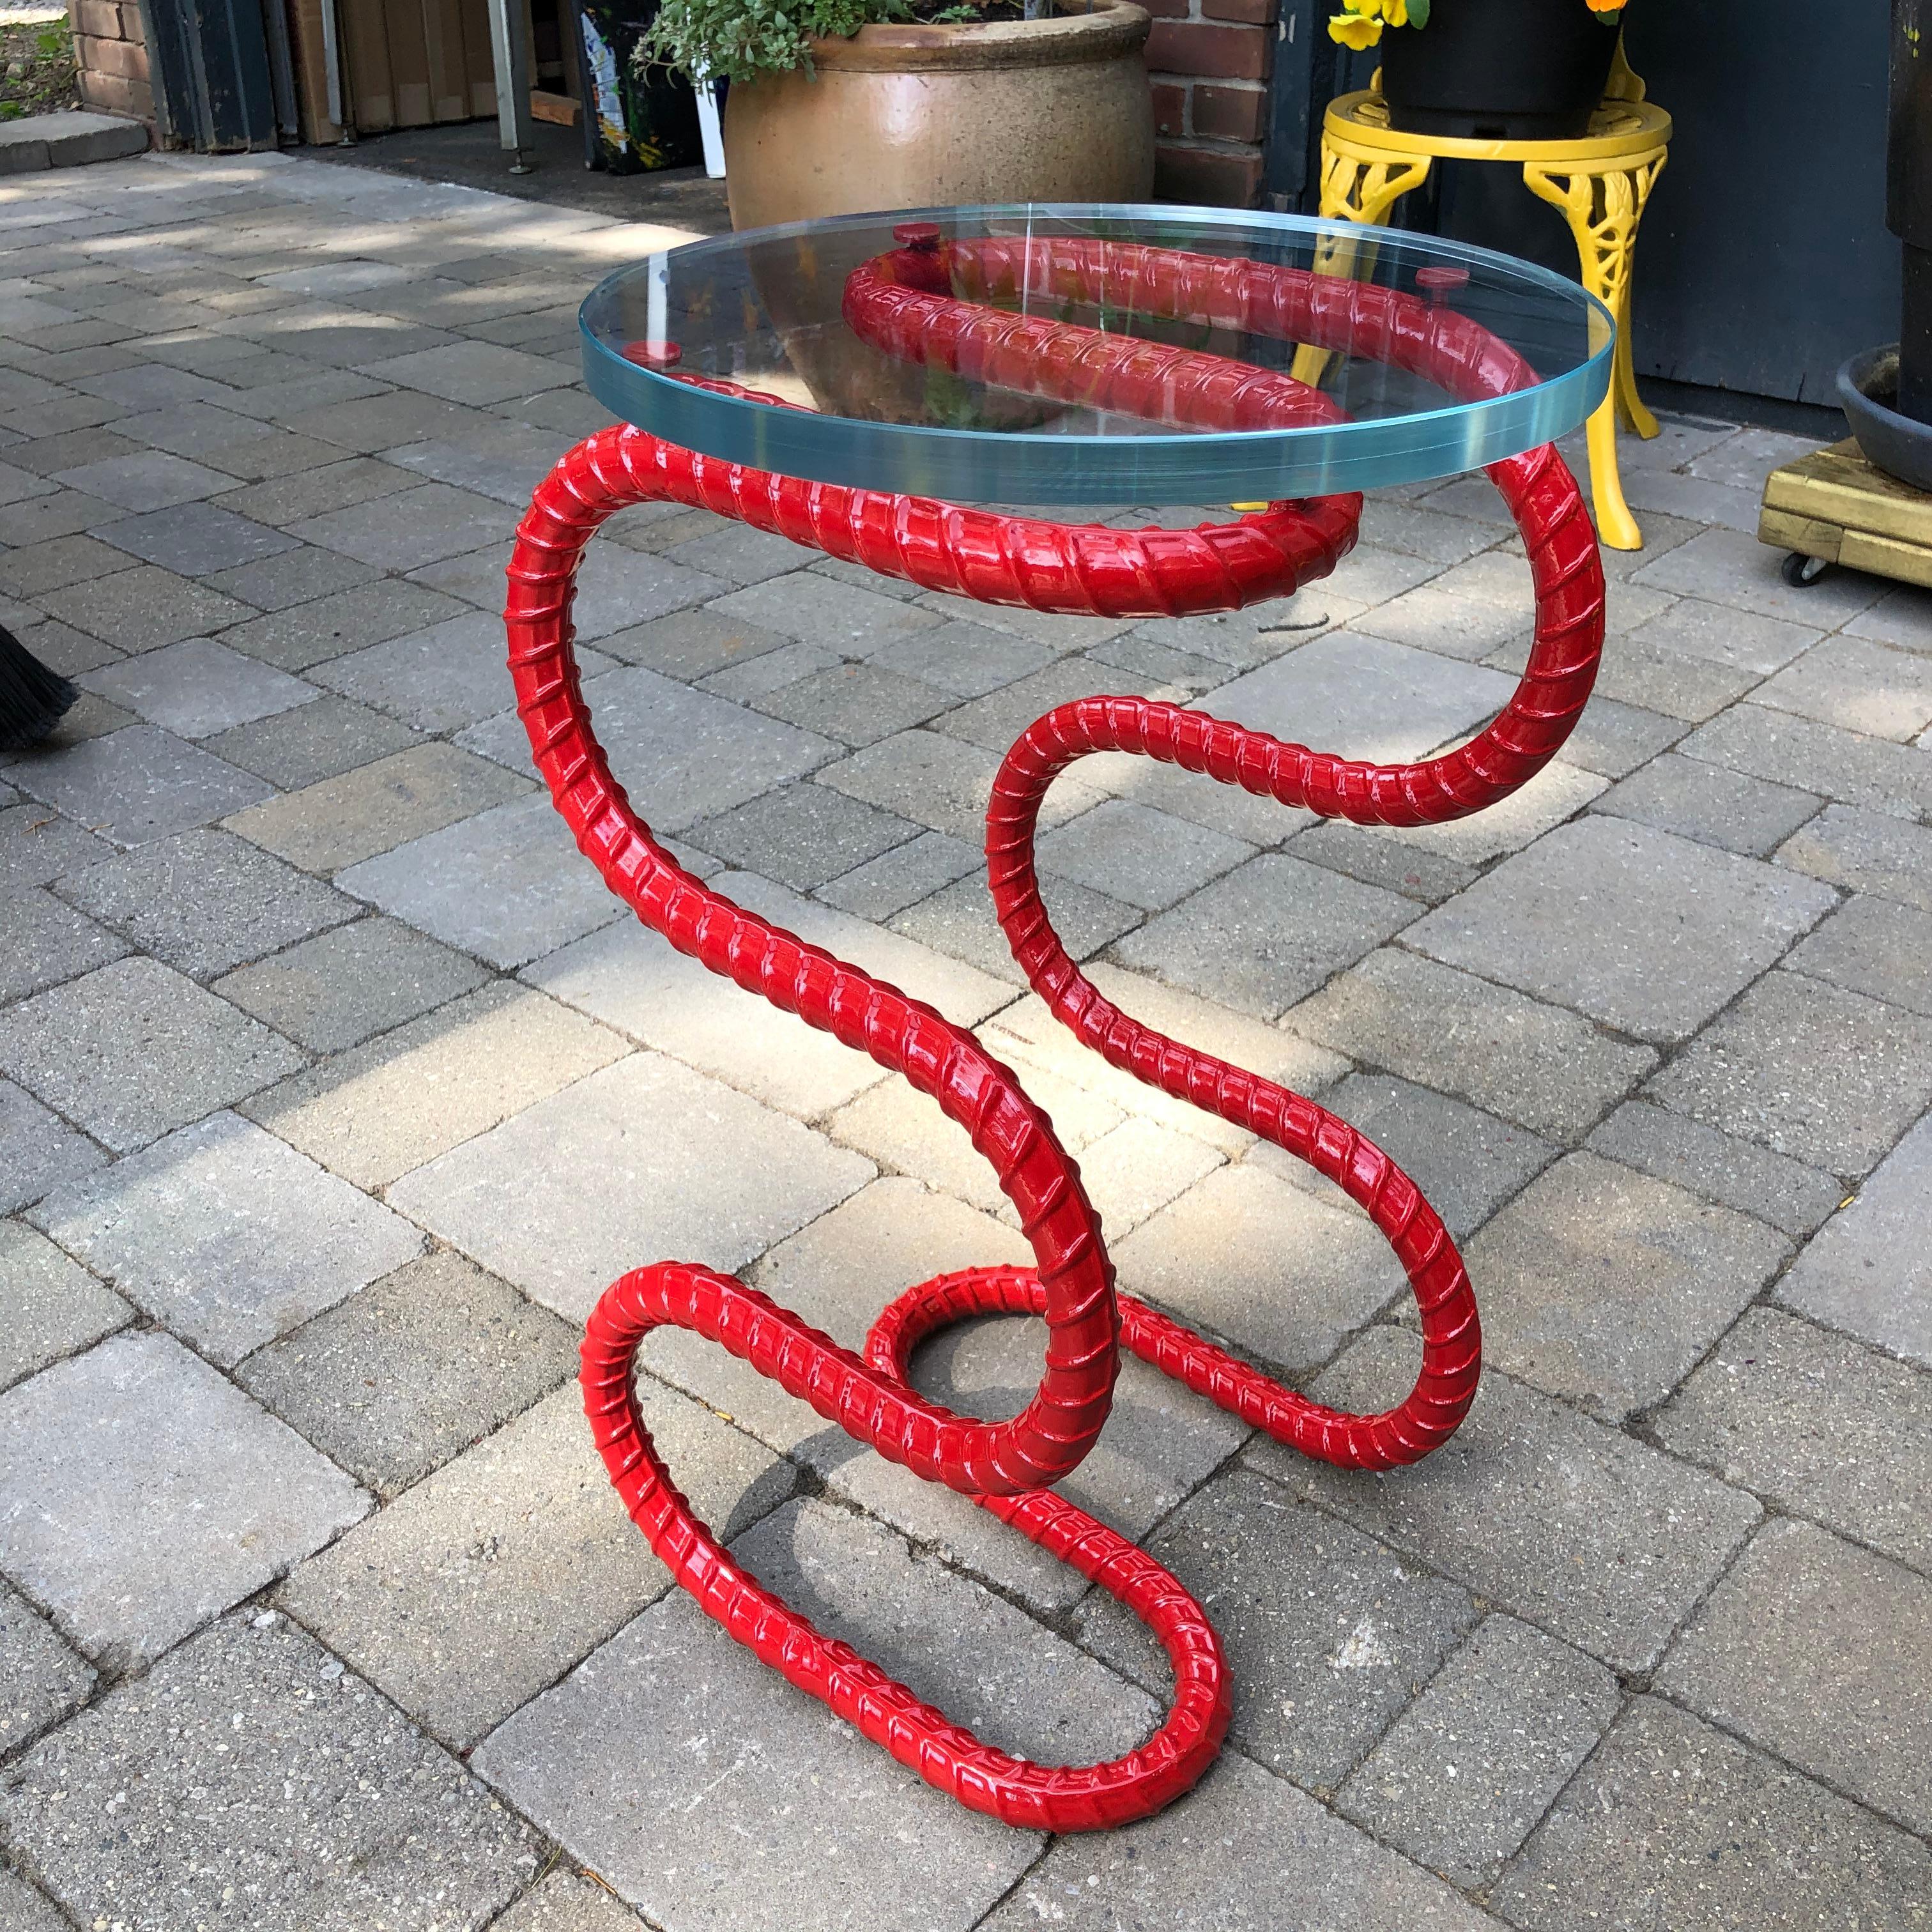 The Cobra side table is part of the Rebar series created by artist Troy Smith. Rebar is the steel used in the forming of concrete to give it strength. Rebar is heated with acetylene torches and red-hot forges, skillfully sculpted by hand and with